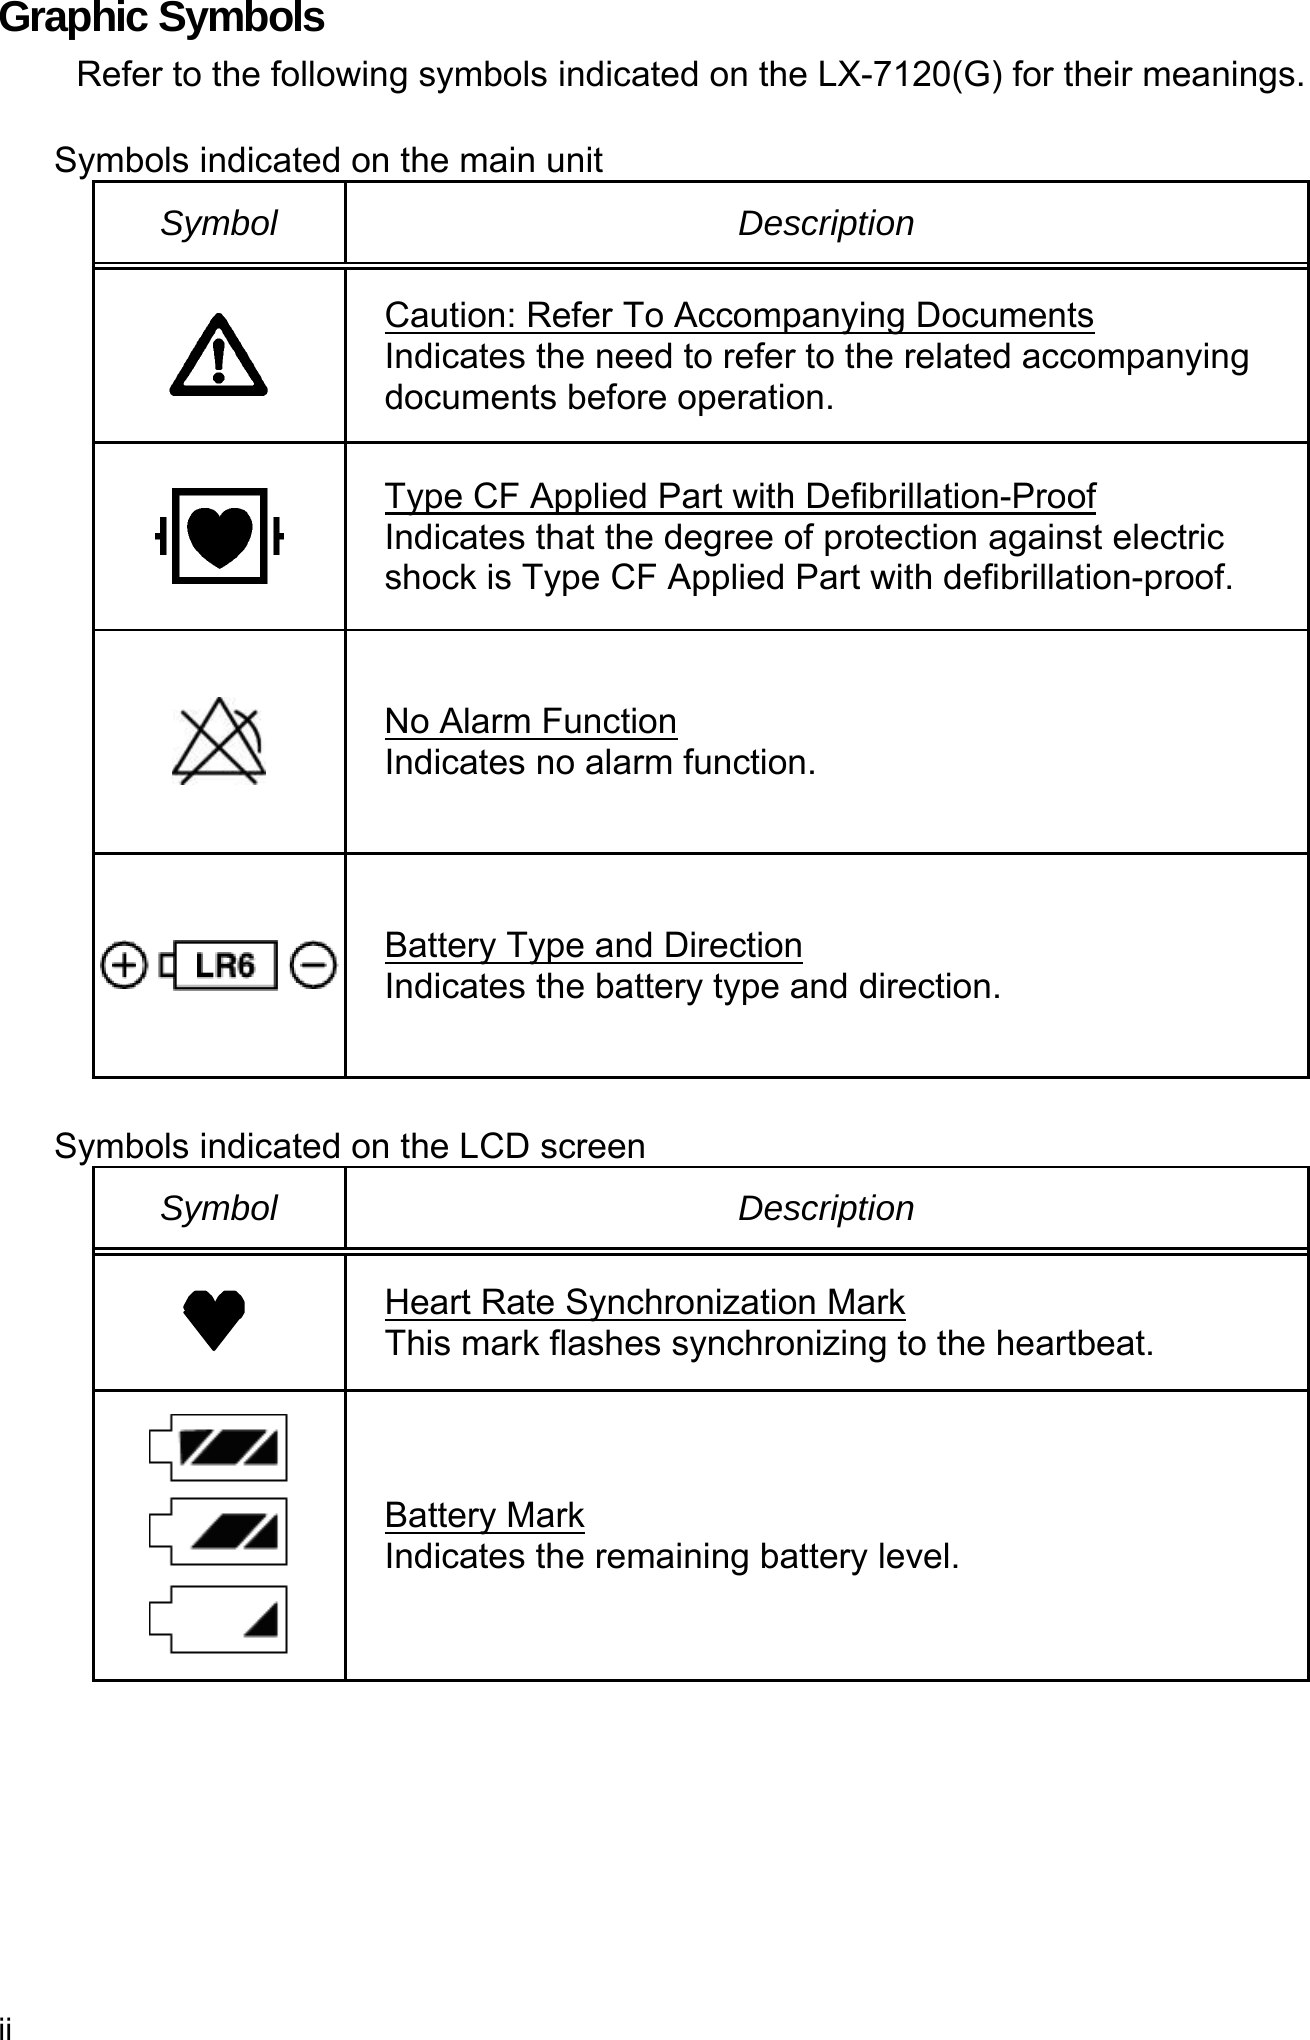 ii  Graphic Symbols Refer to the following symbols indicated on the LX-7120(G) for their meanings.  Symbols indicated on the main unit Symbol Description  Caution: Refer To Accompanying Documents Indicates the need to refer to the related accompanying documents before operation.  Type CF Applied Part with Defibrillation-Proof Indicates that the degree of protection against electric shock is Type CF Applied Part with defibrillation-proof.  No Alarm Function Indicates no alarm function.  Battery Type and Direction Indicates the battery type and direction.  Symbols indicated on the LCD screen Symbol Description   Heart Rate Synchronization Mark This mark flashes synchronizing to the heartbeat.  Battery Mark Indicates the remaining battery level. 